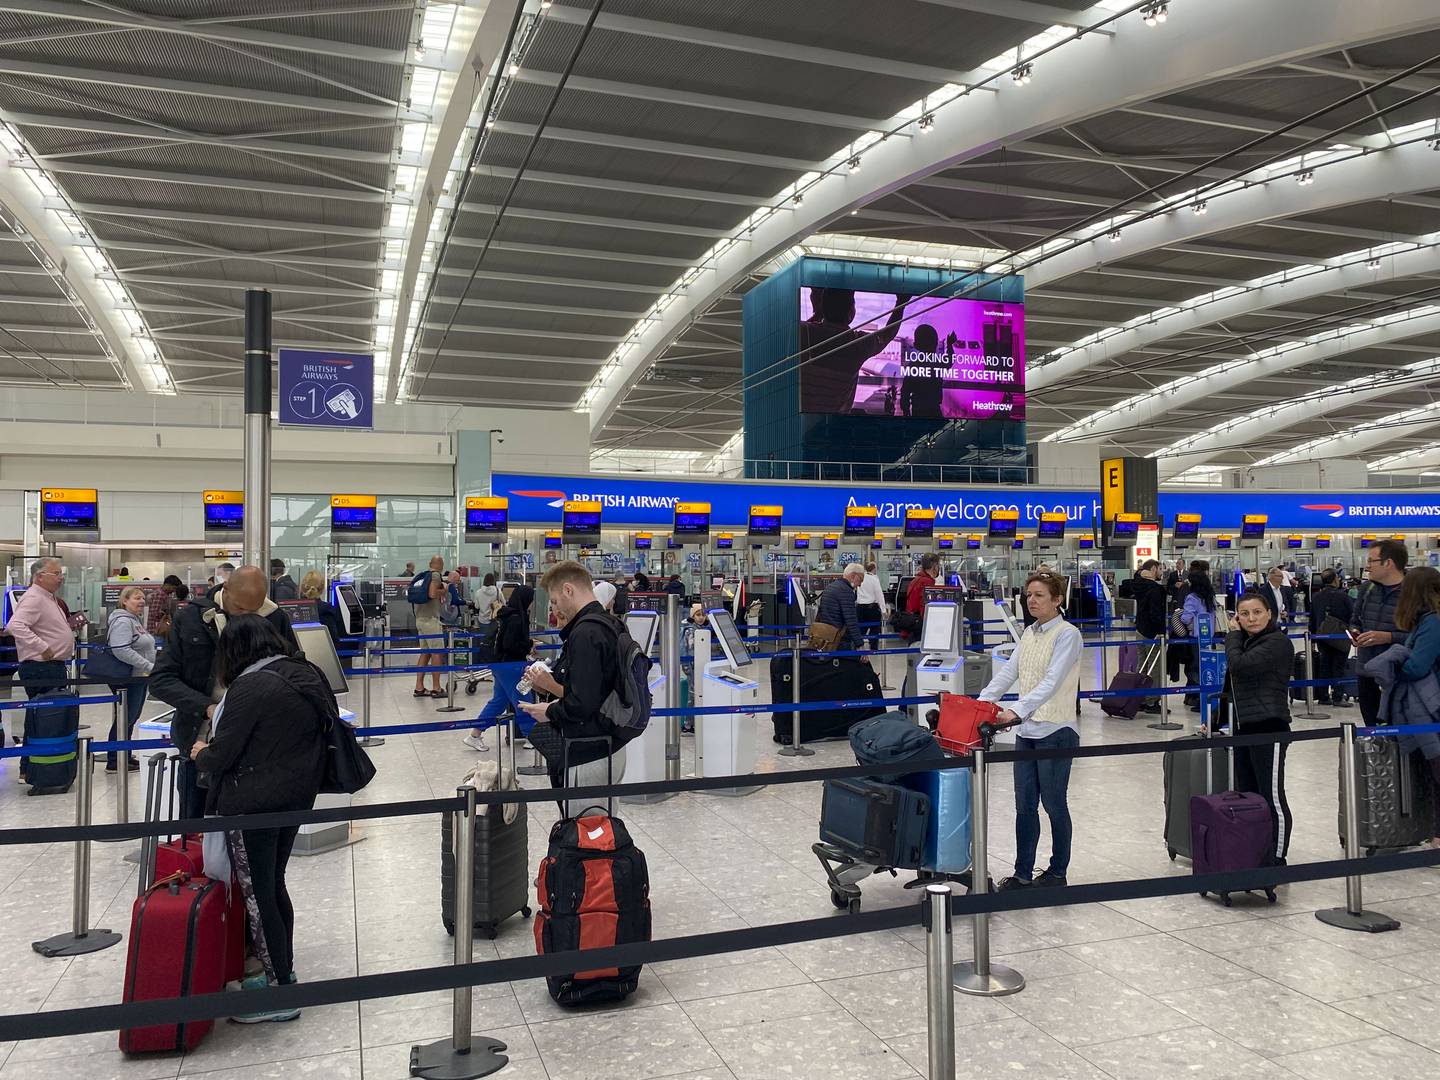 The UK government has urged people to apply for a new passport as soon as they can if their existing document is about to expire, amid delays in processing. PA